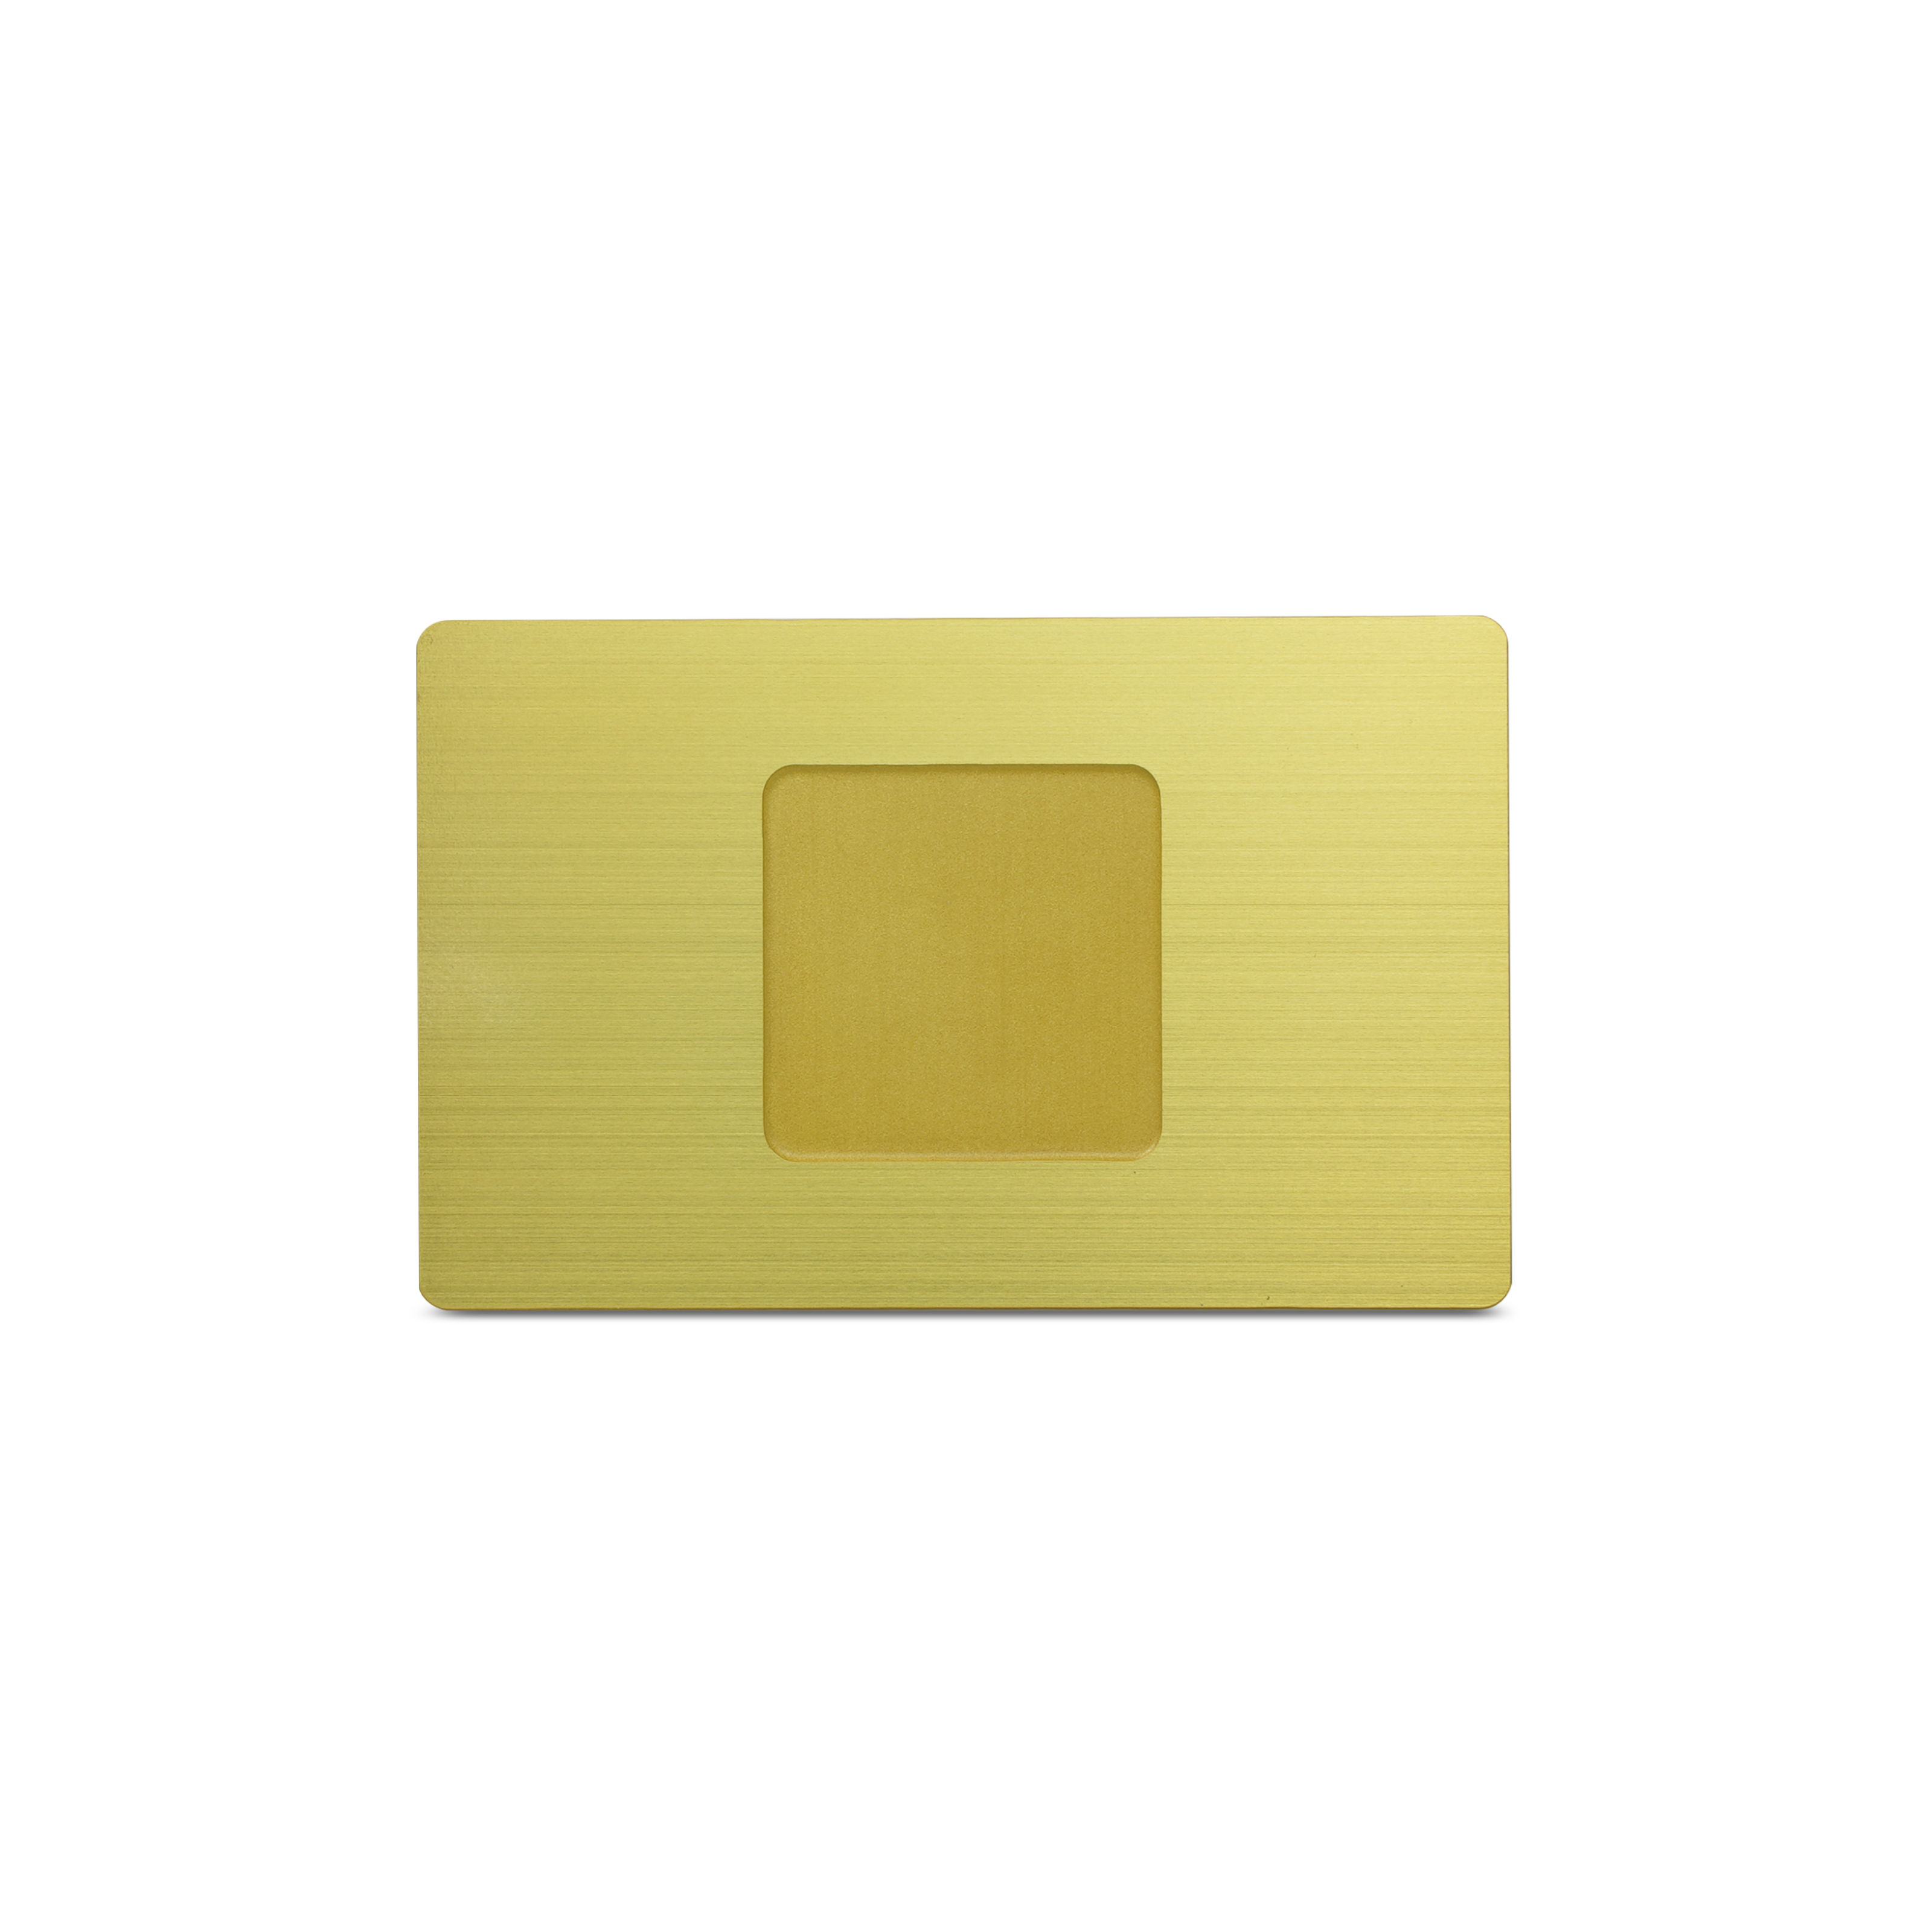 NFC-vCard - Digital business card - incl. NFC-vCard access - metal - 85.6 x 54 mm - gold with engraving